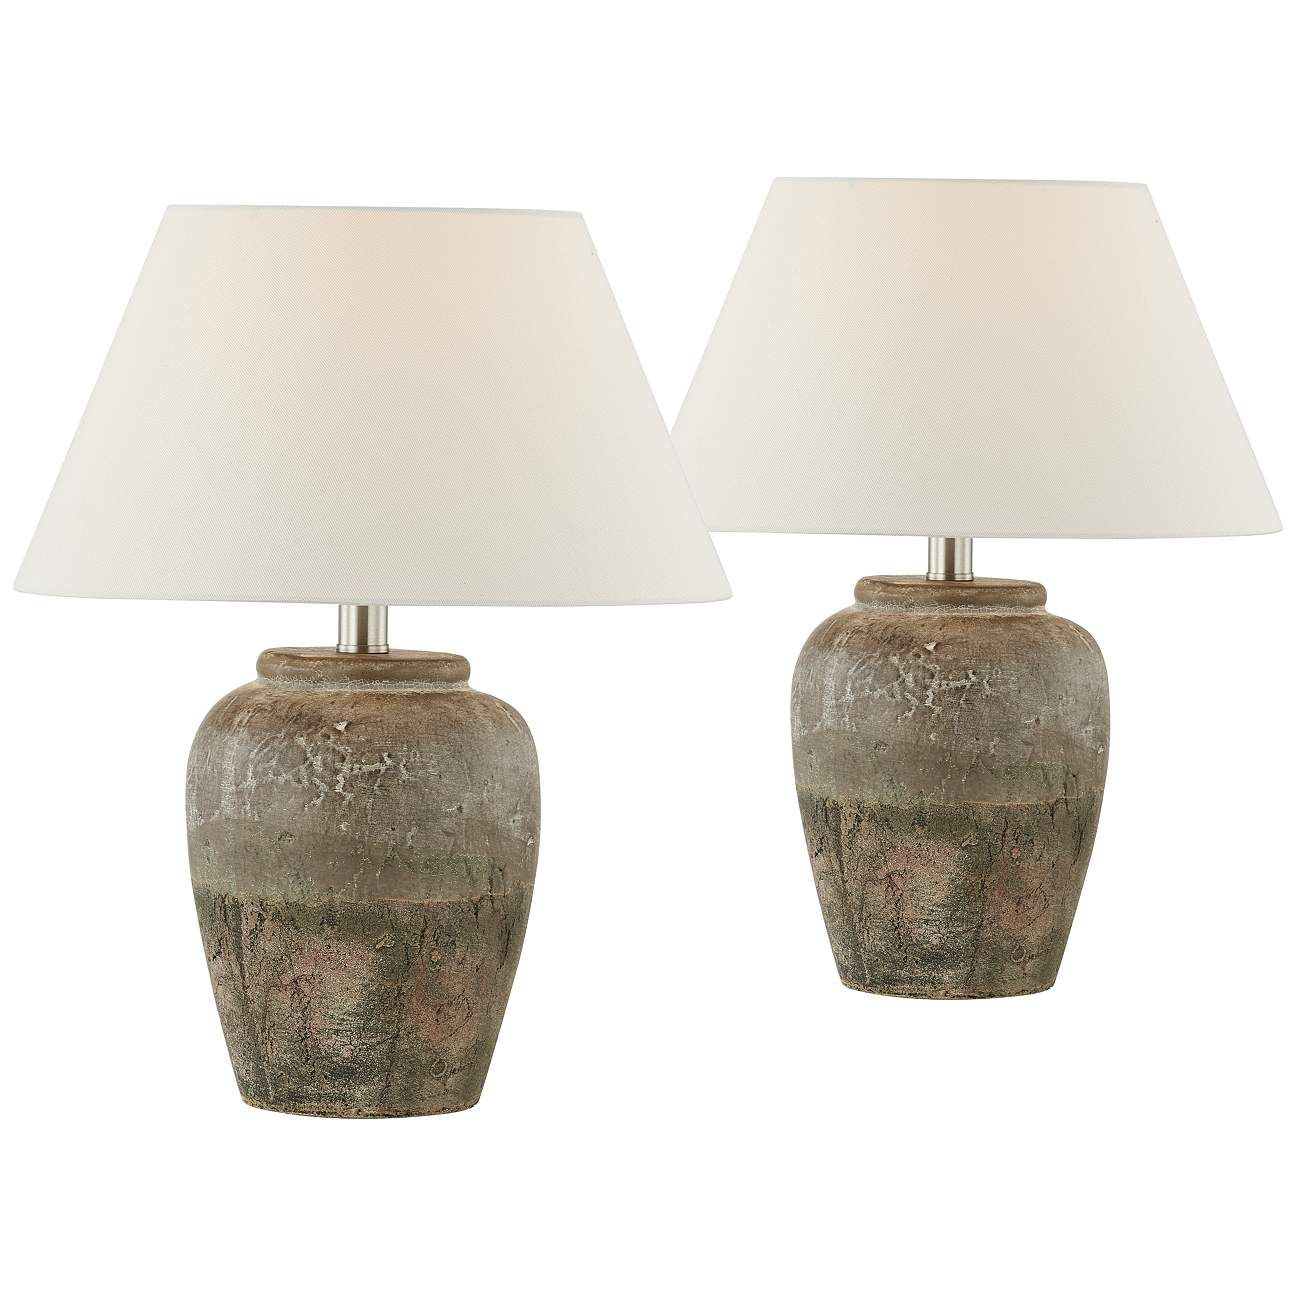 Forty West Anders Hues of Brown Accent Table Lamps Set of 2 - #250H1 | Lamps Plus | Lamps Plus